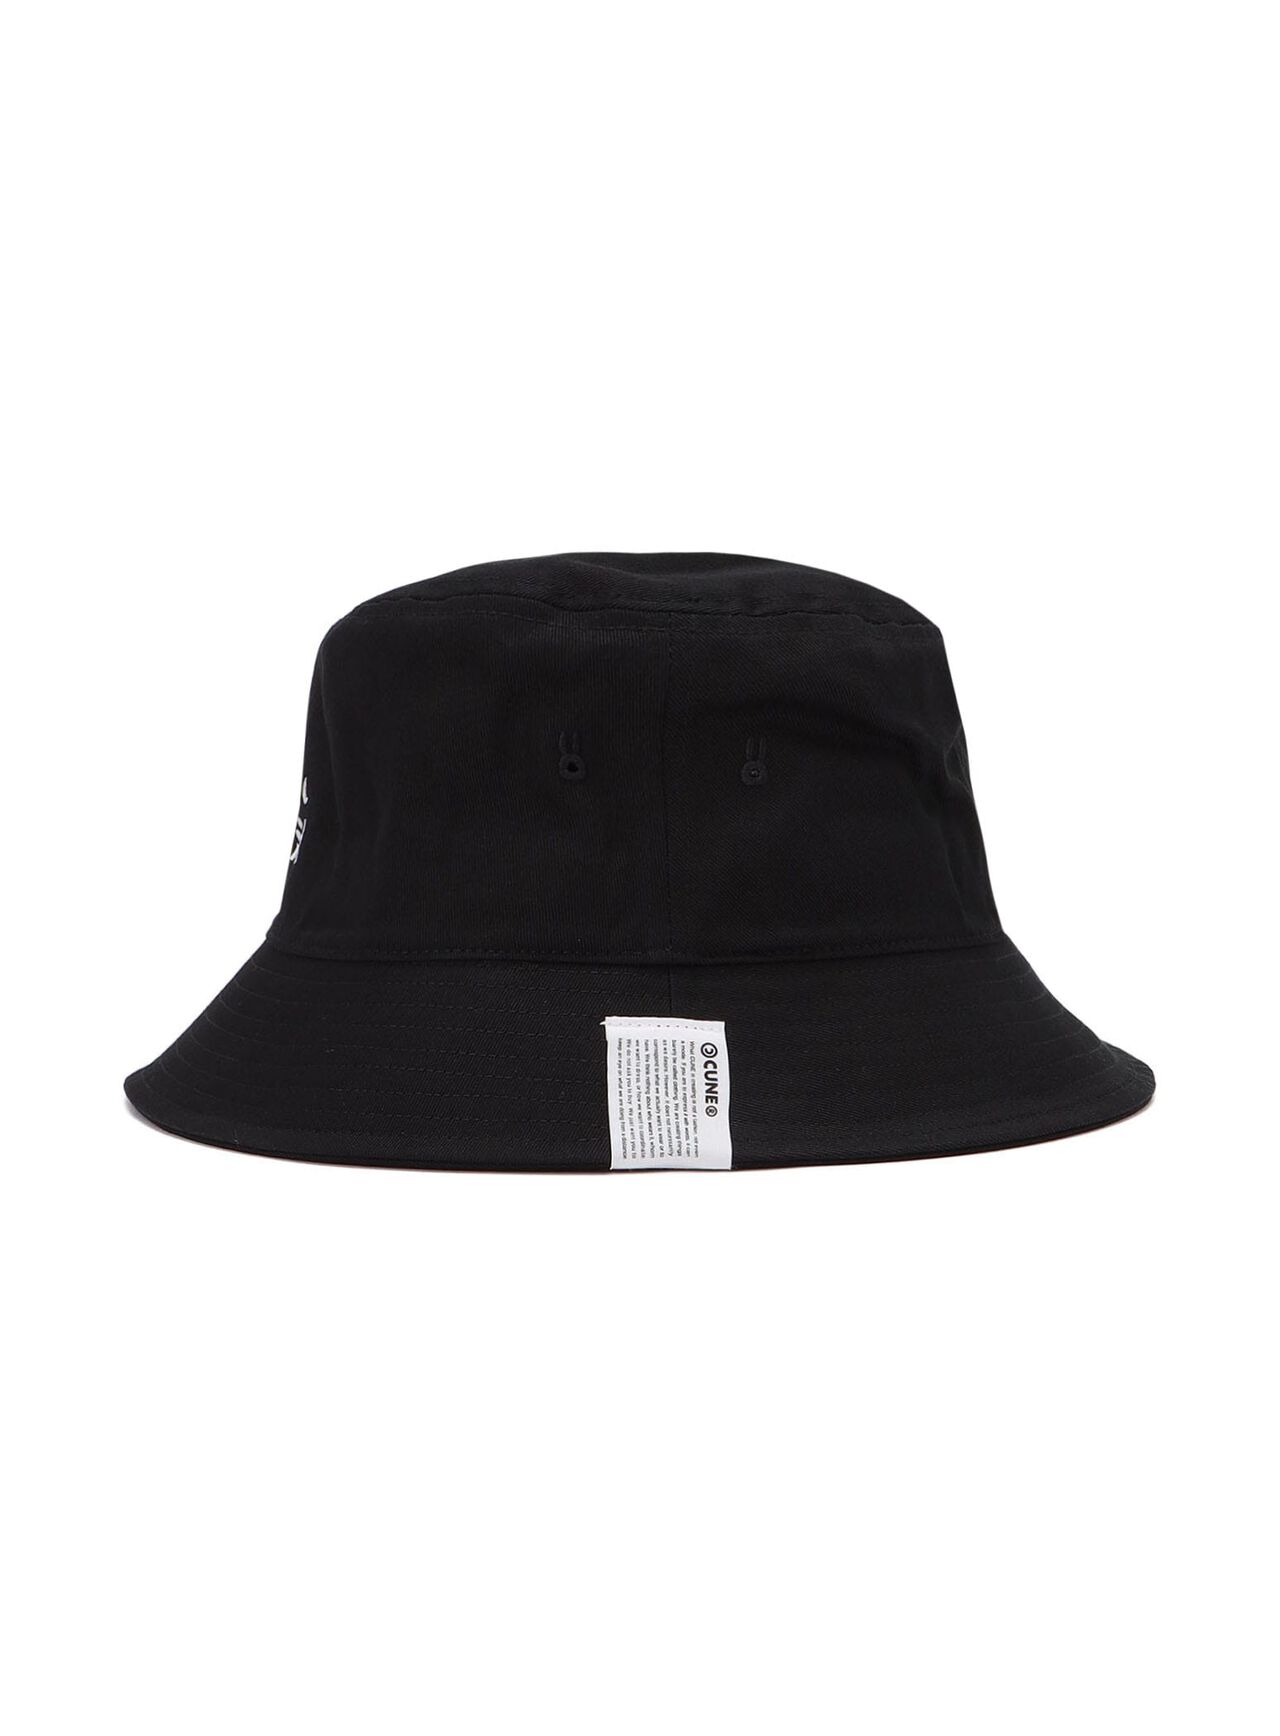 Embroidered Bucket Hat Dashi,ONE, large image number 1